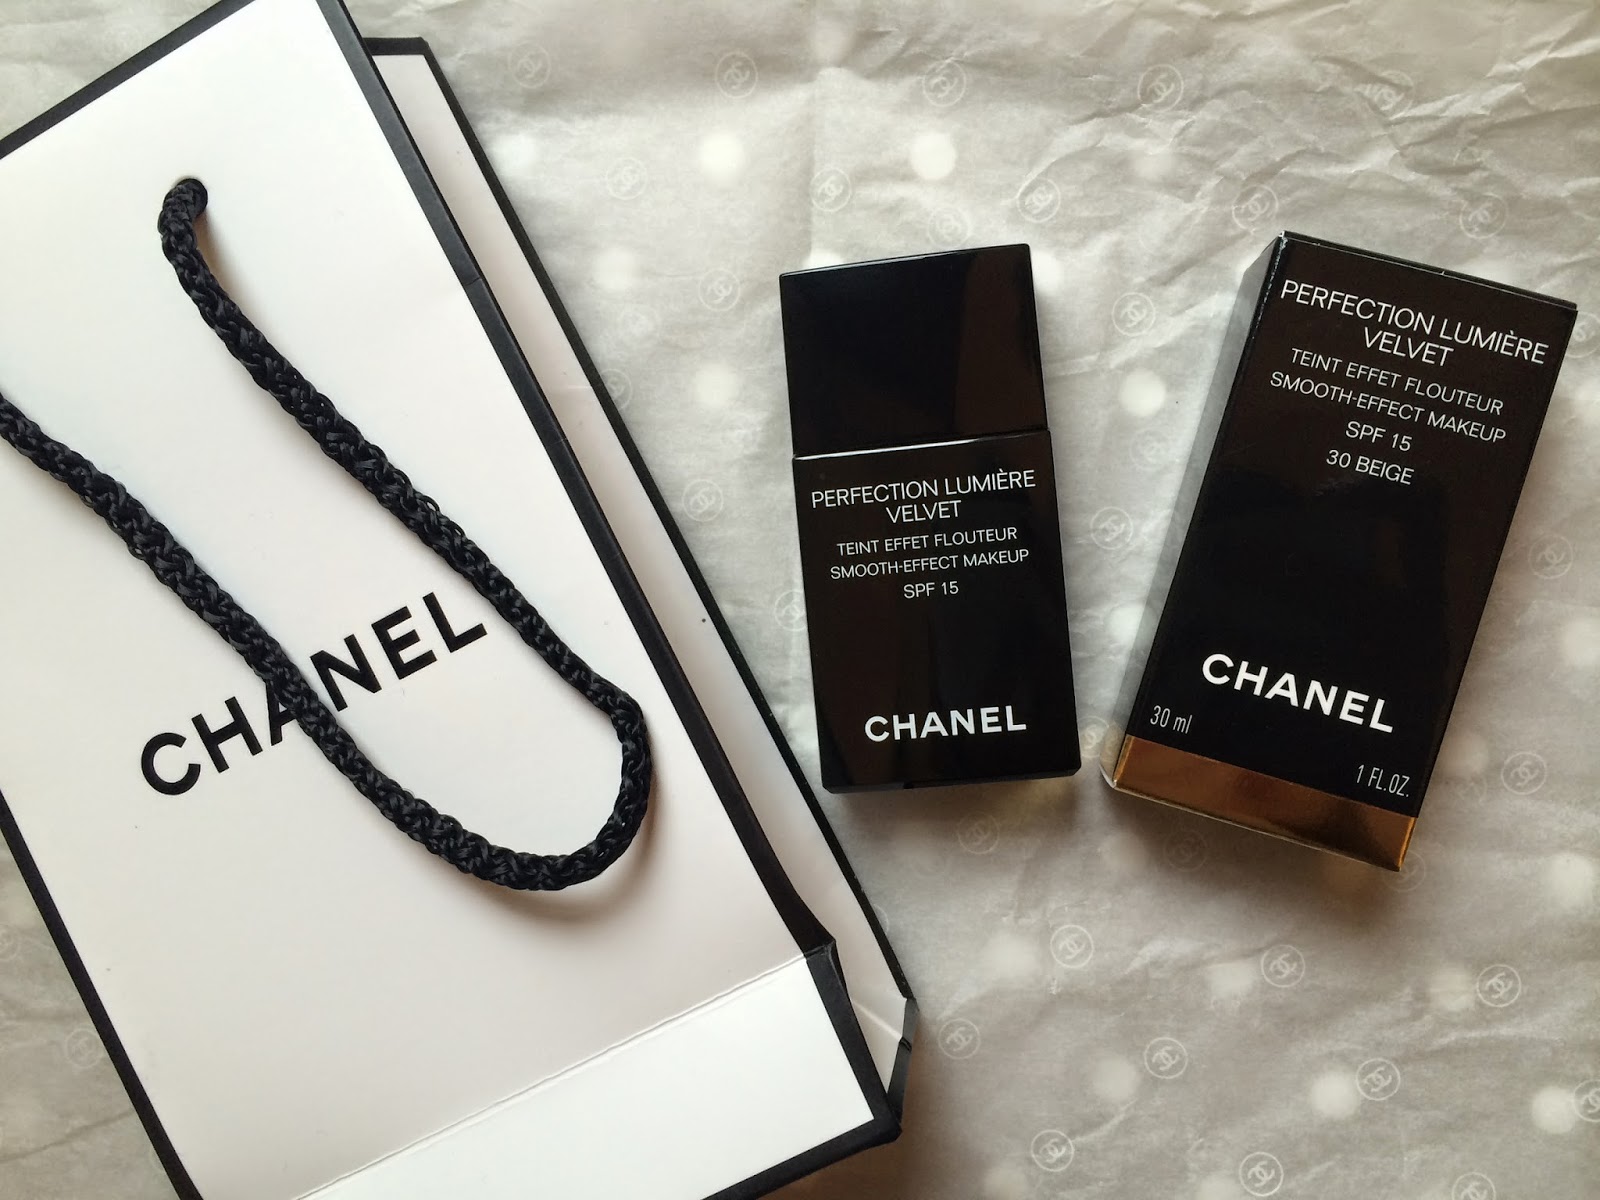 Chanel Perfection Lumiere VELVET Review! / Dairy of Pooja